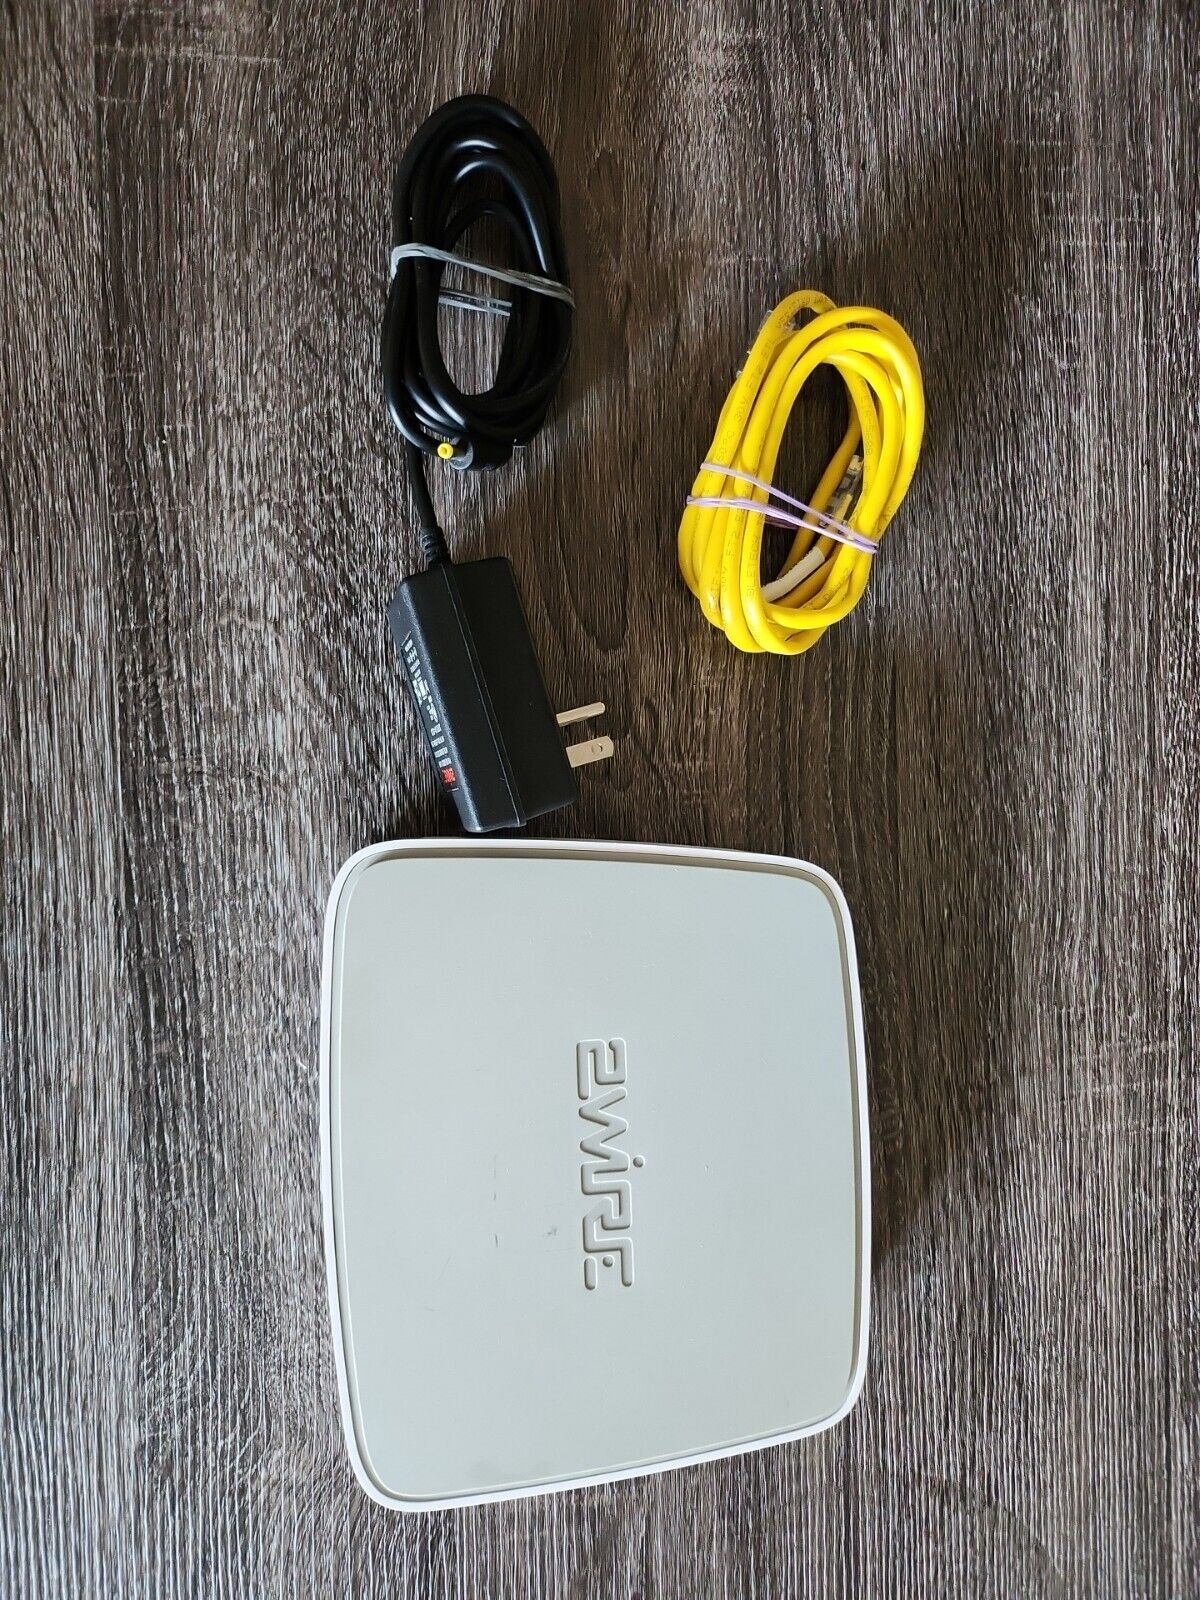 AT&T 2WIRE 2701HG-B HIGH SPEED WIRELESS DSL MODEM ONLY 